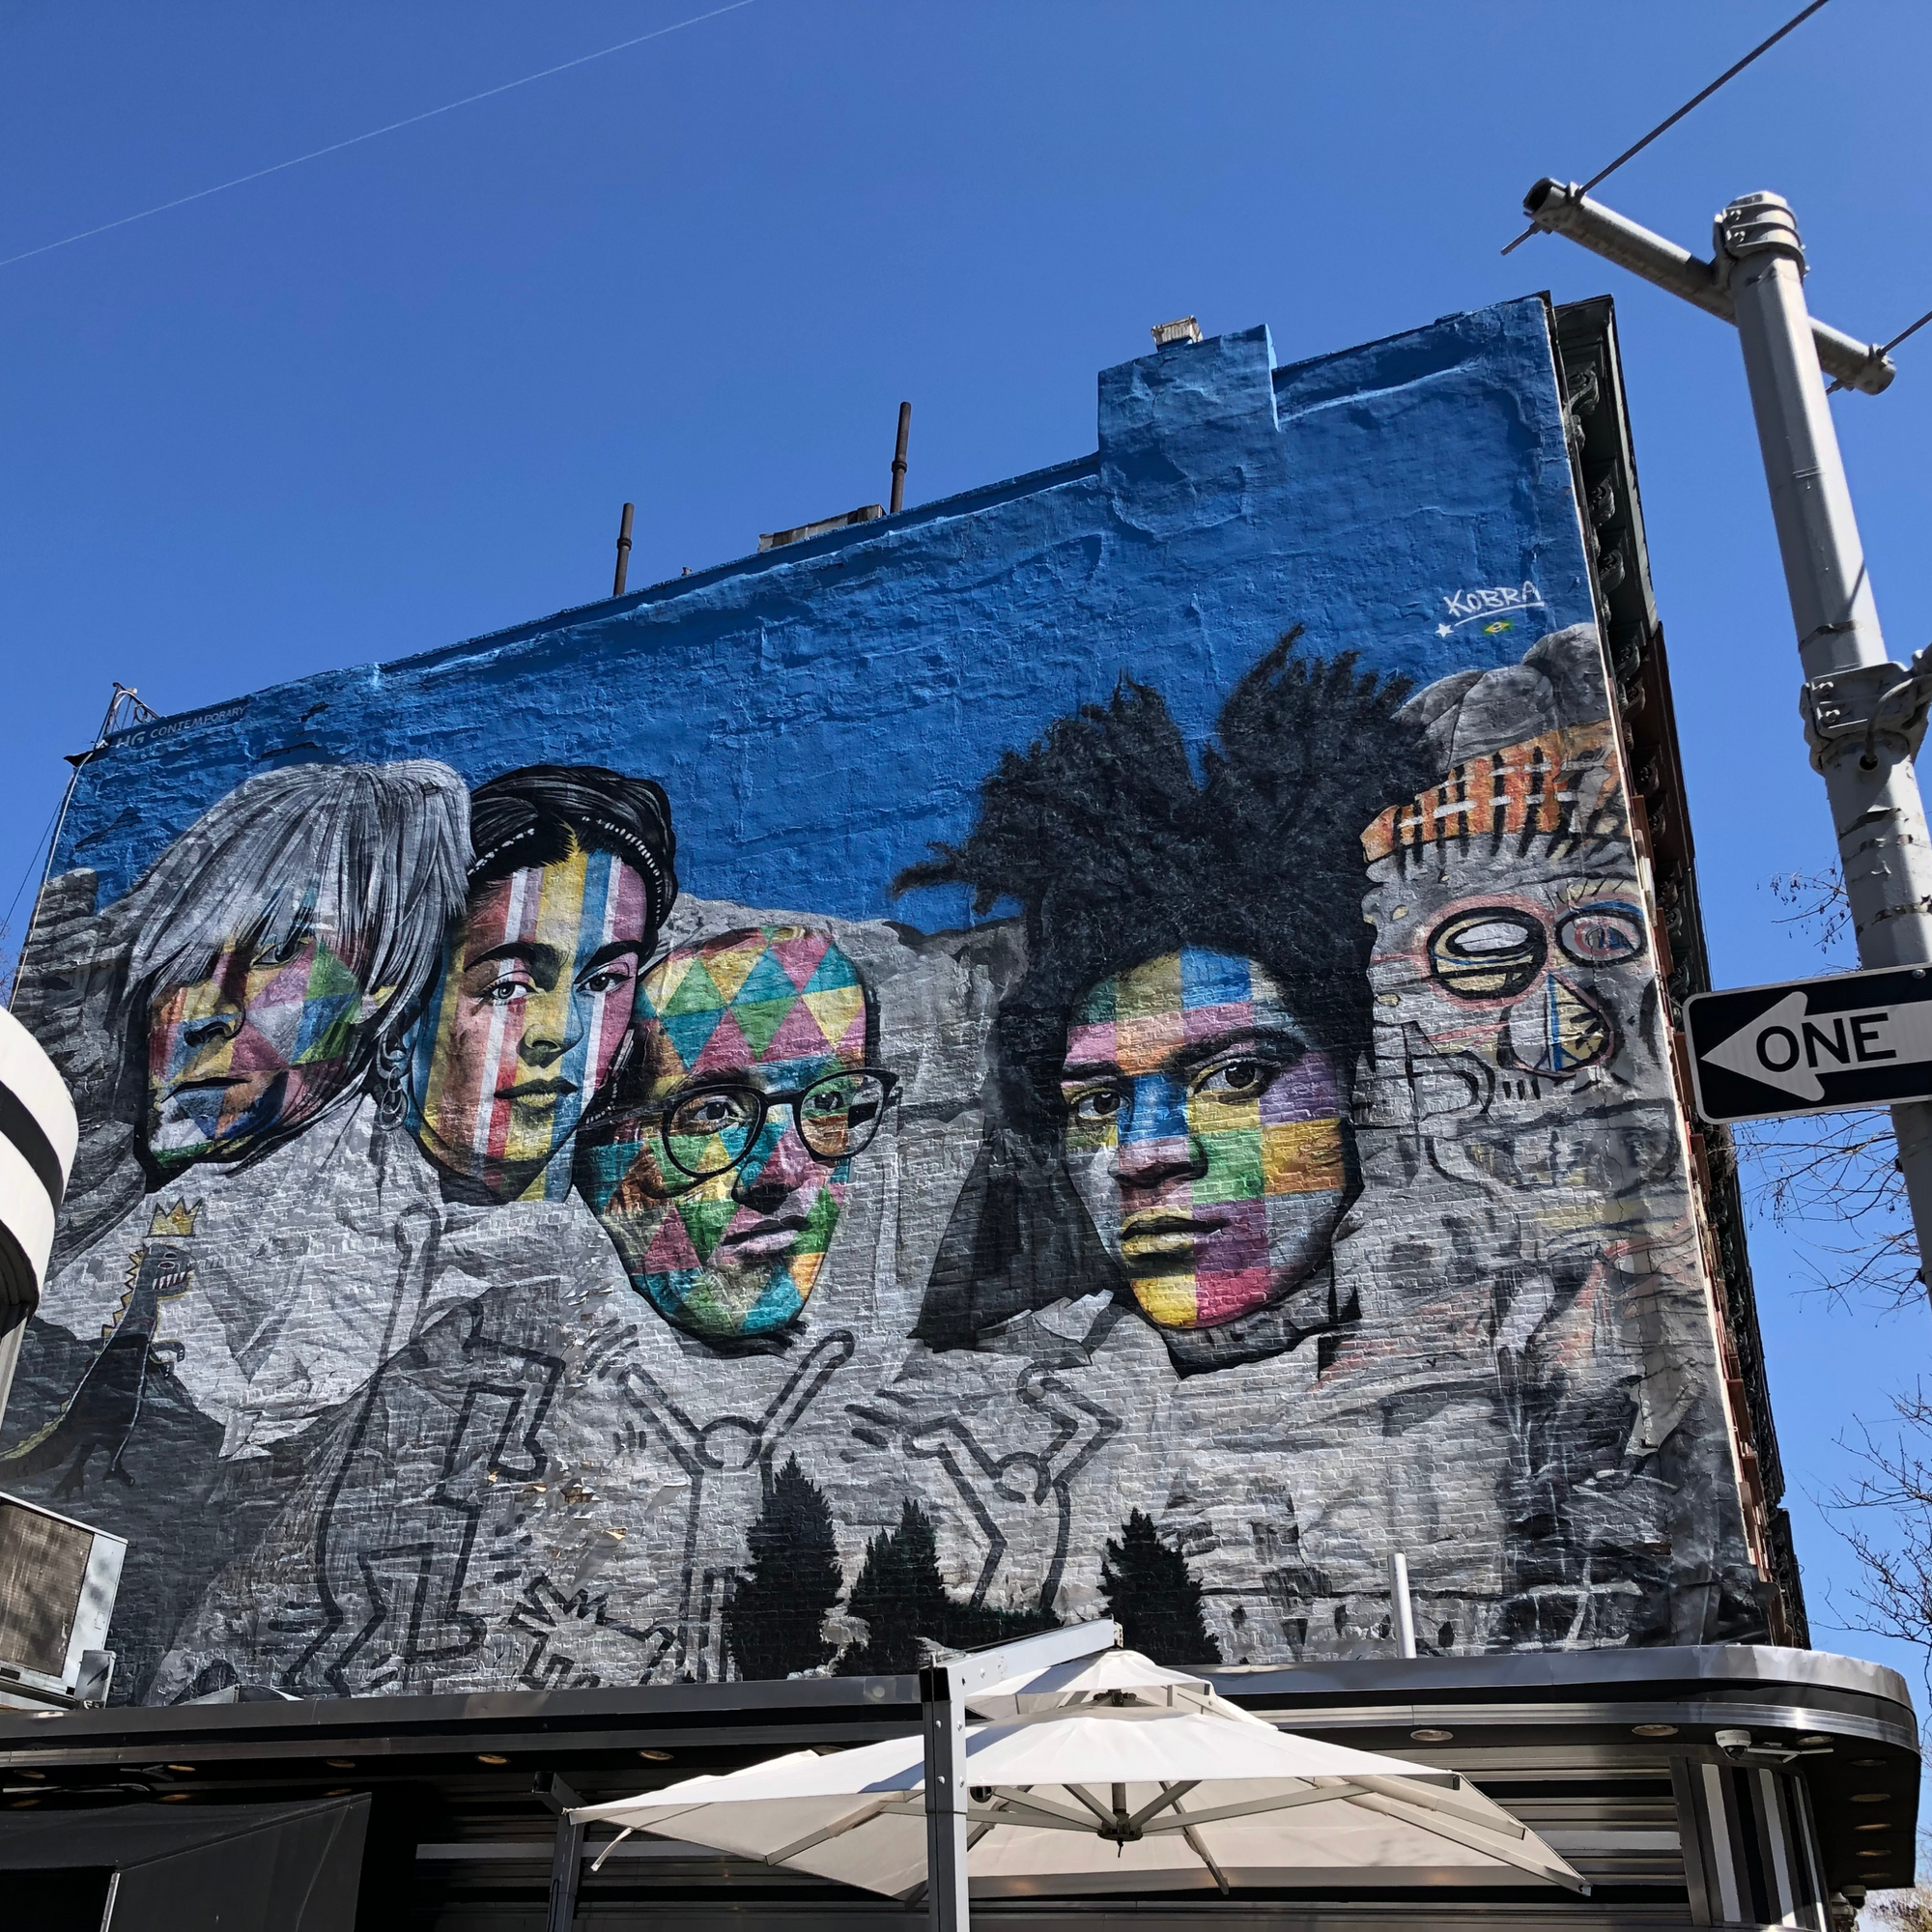 Colorful wall mural of Andy Warhol, Frida Kahlo, Keith Haring, and Jean-Michel Basquiat on Mount Rushmore